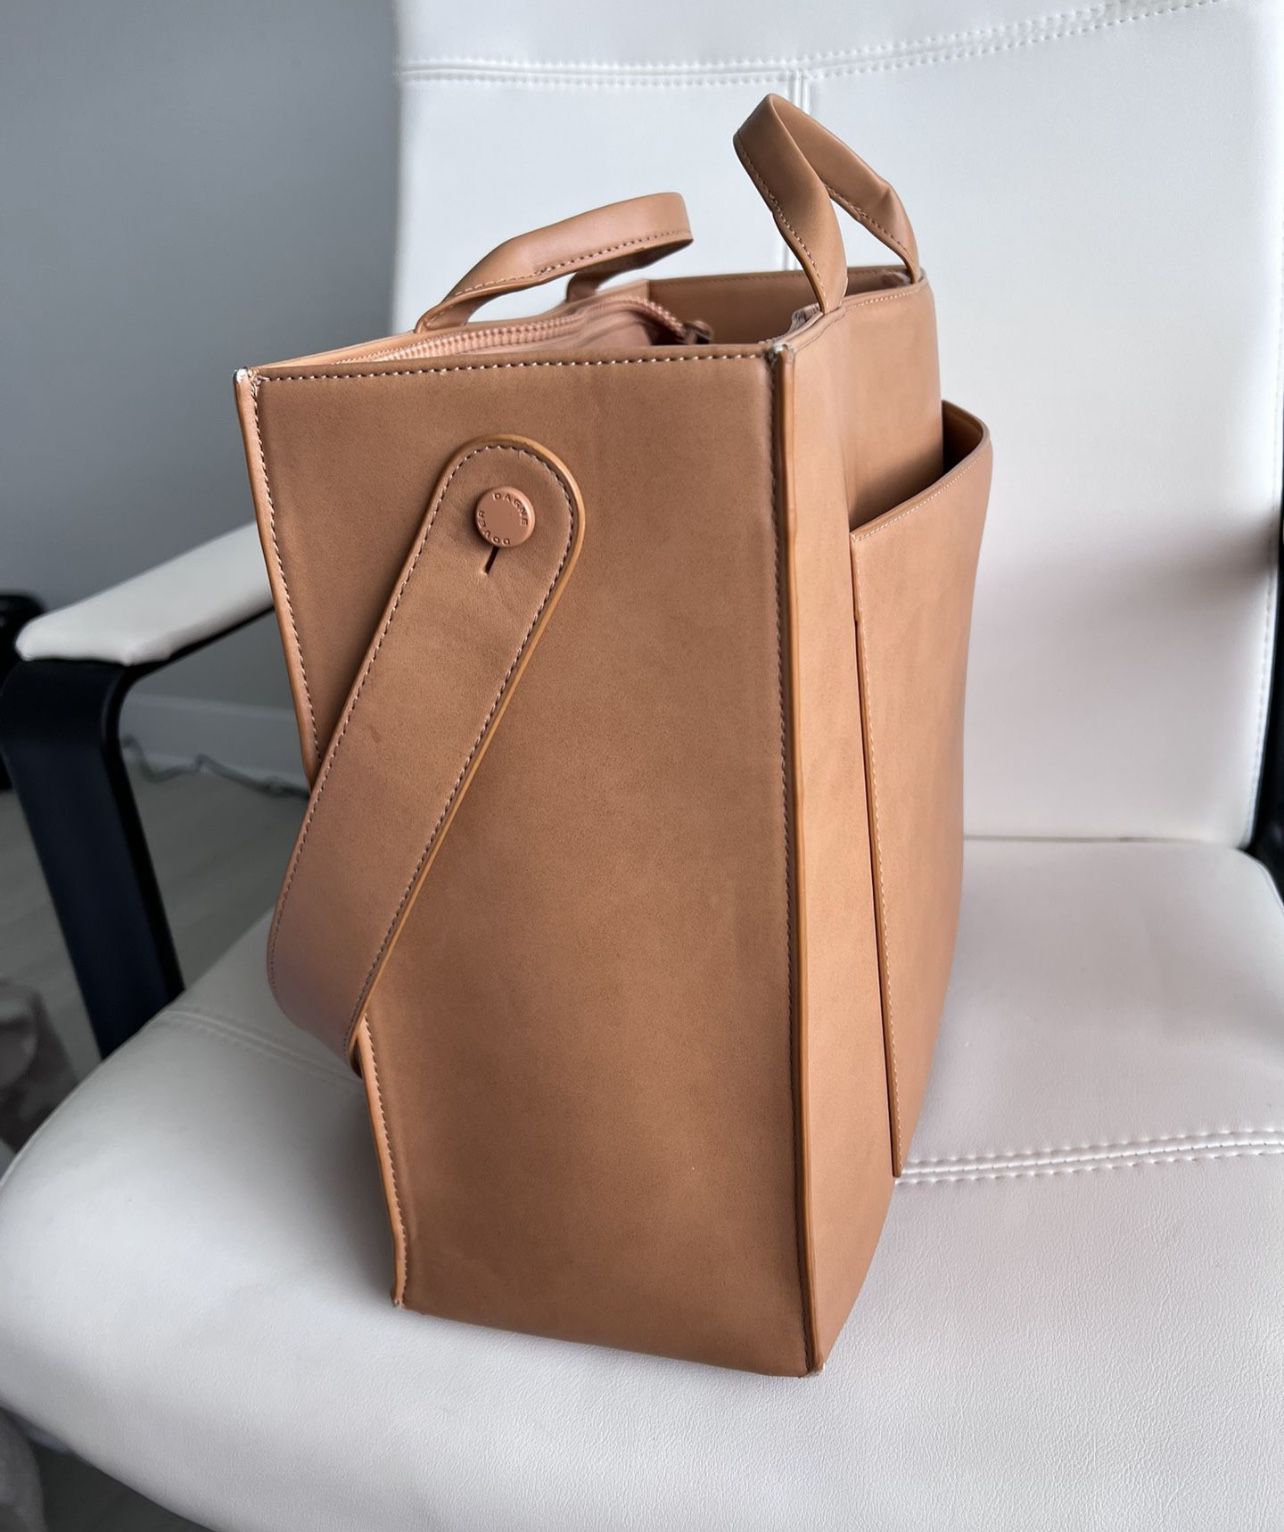 Medium Pinto Daily Tote for Sale in Orlando, FL - OfferUp